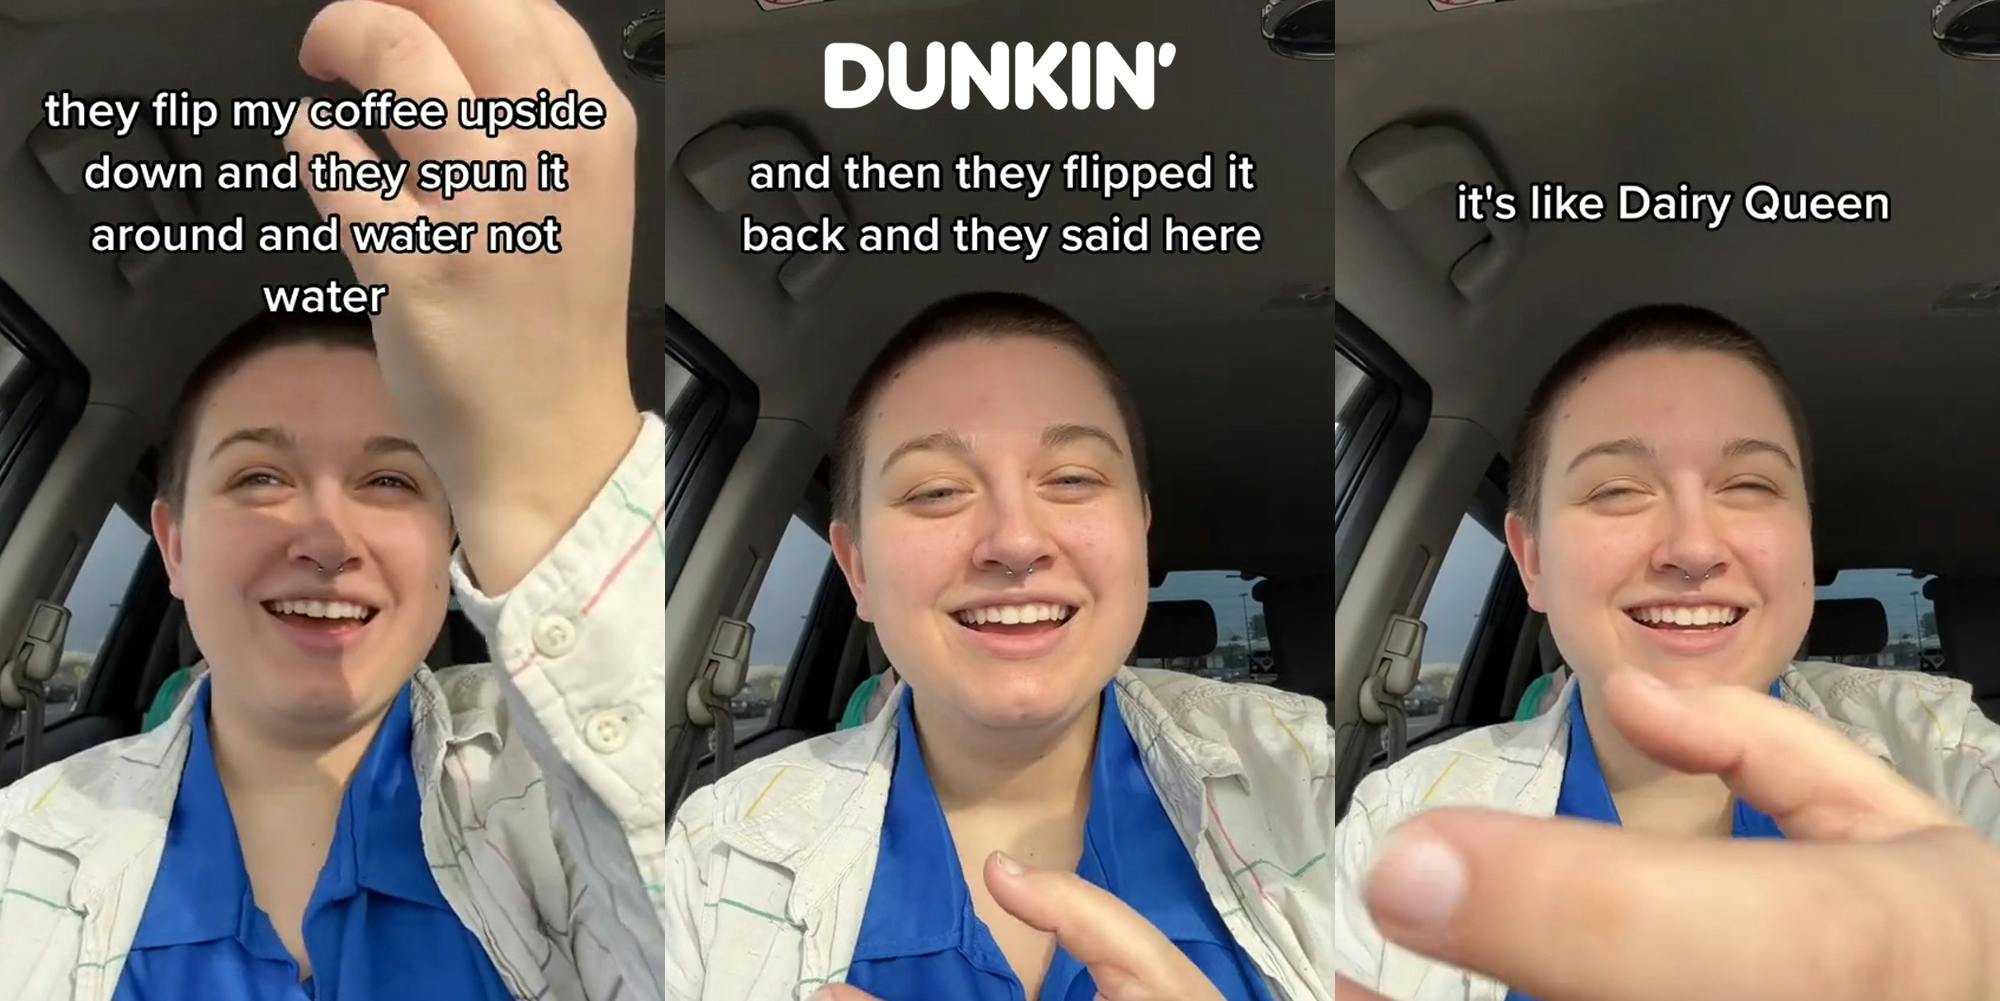 customer speaking in car with hand up with caption "they flip my coffee upside down and they spun it around and water not water" (l) customer speaking in car with caption "and then they flipped it back and they said here" with Dunkin' logo above (c) customer speaking in car with hand out with caption "it's like Dairy Queen" (r)